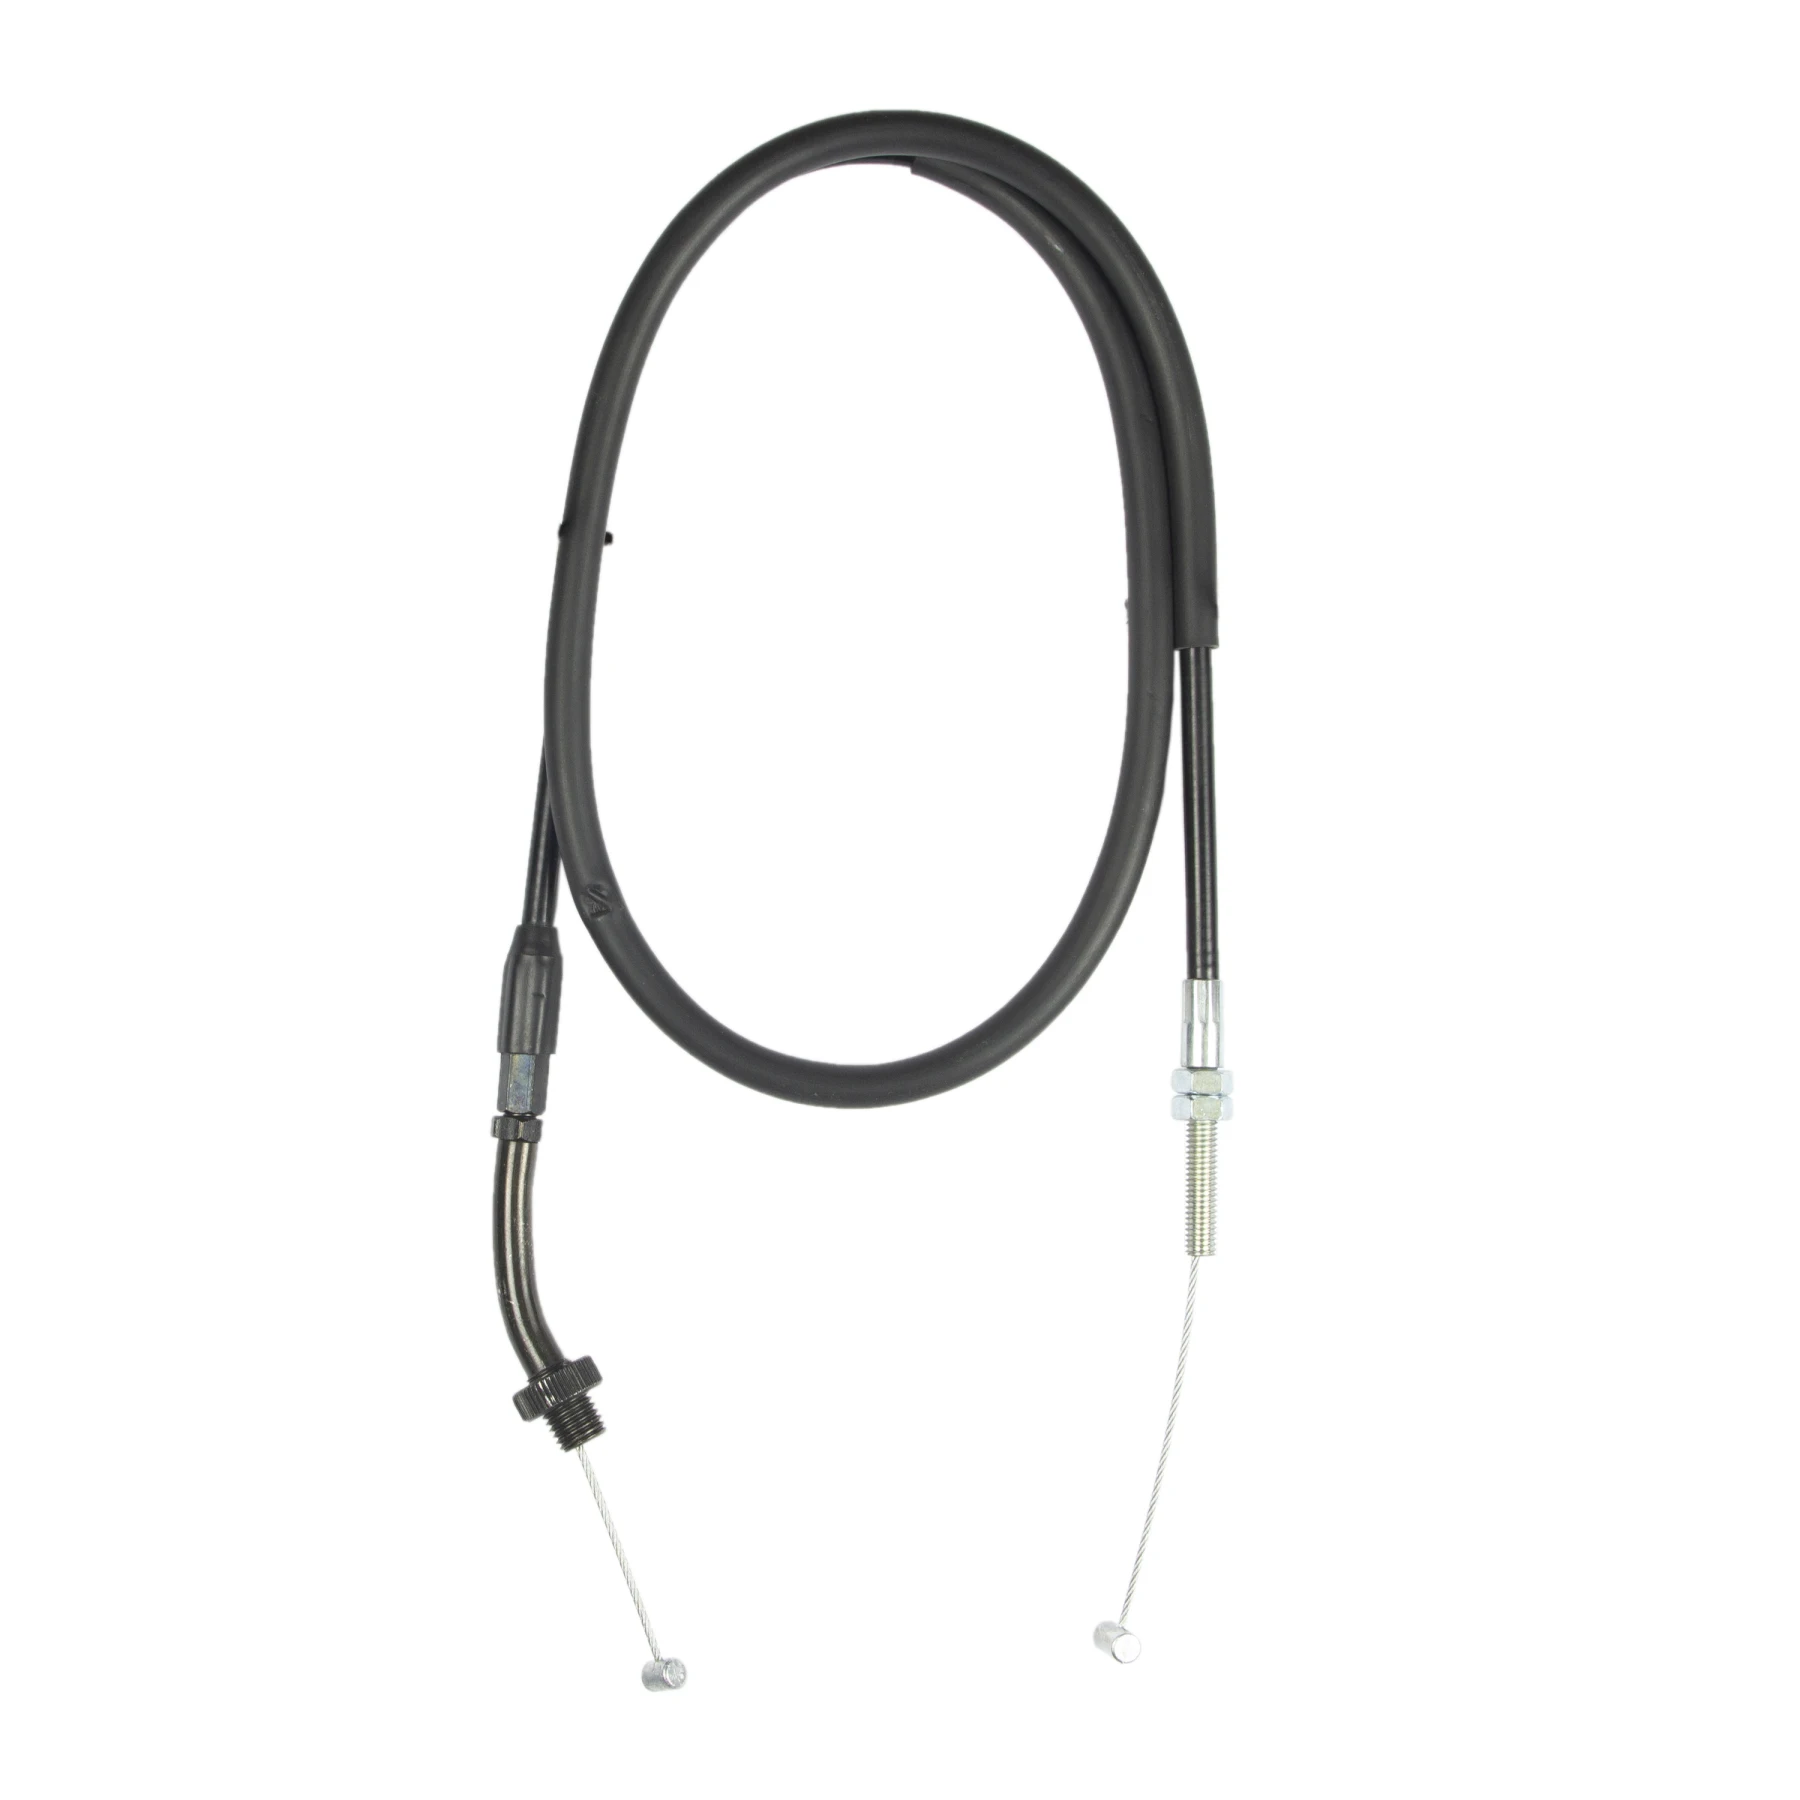 

MotoMaster 17910-MM8-000 Throttle Cable A (OPEN) for Honda VT 1100 C Shadow (1988-1989)